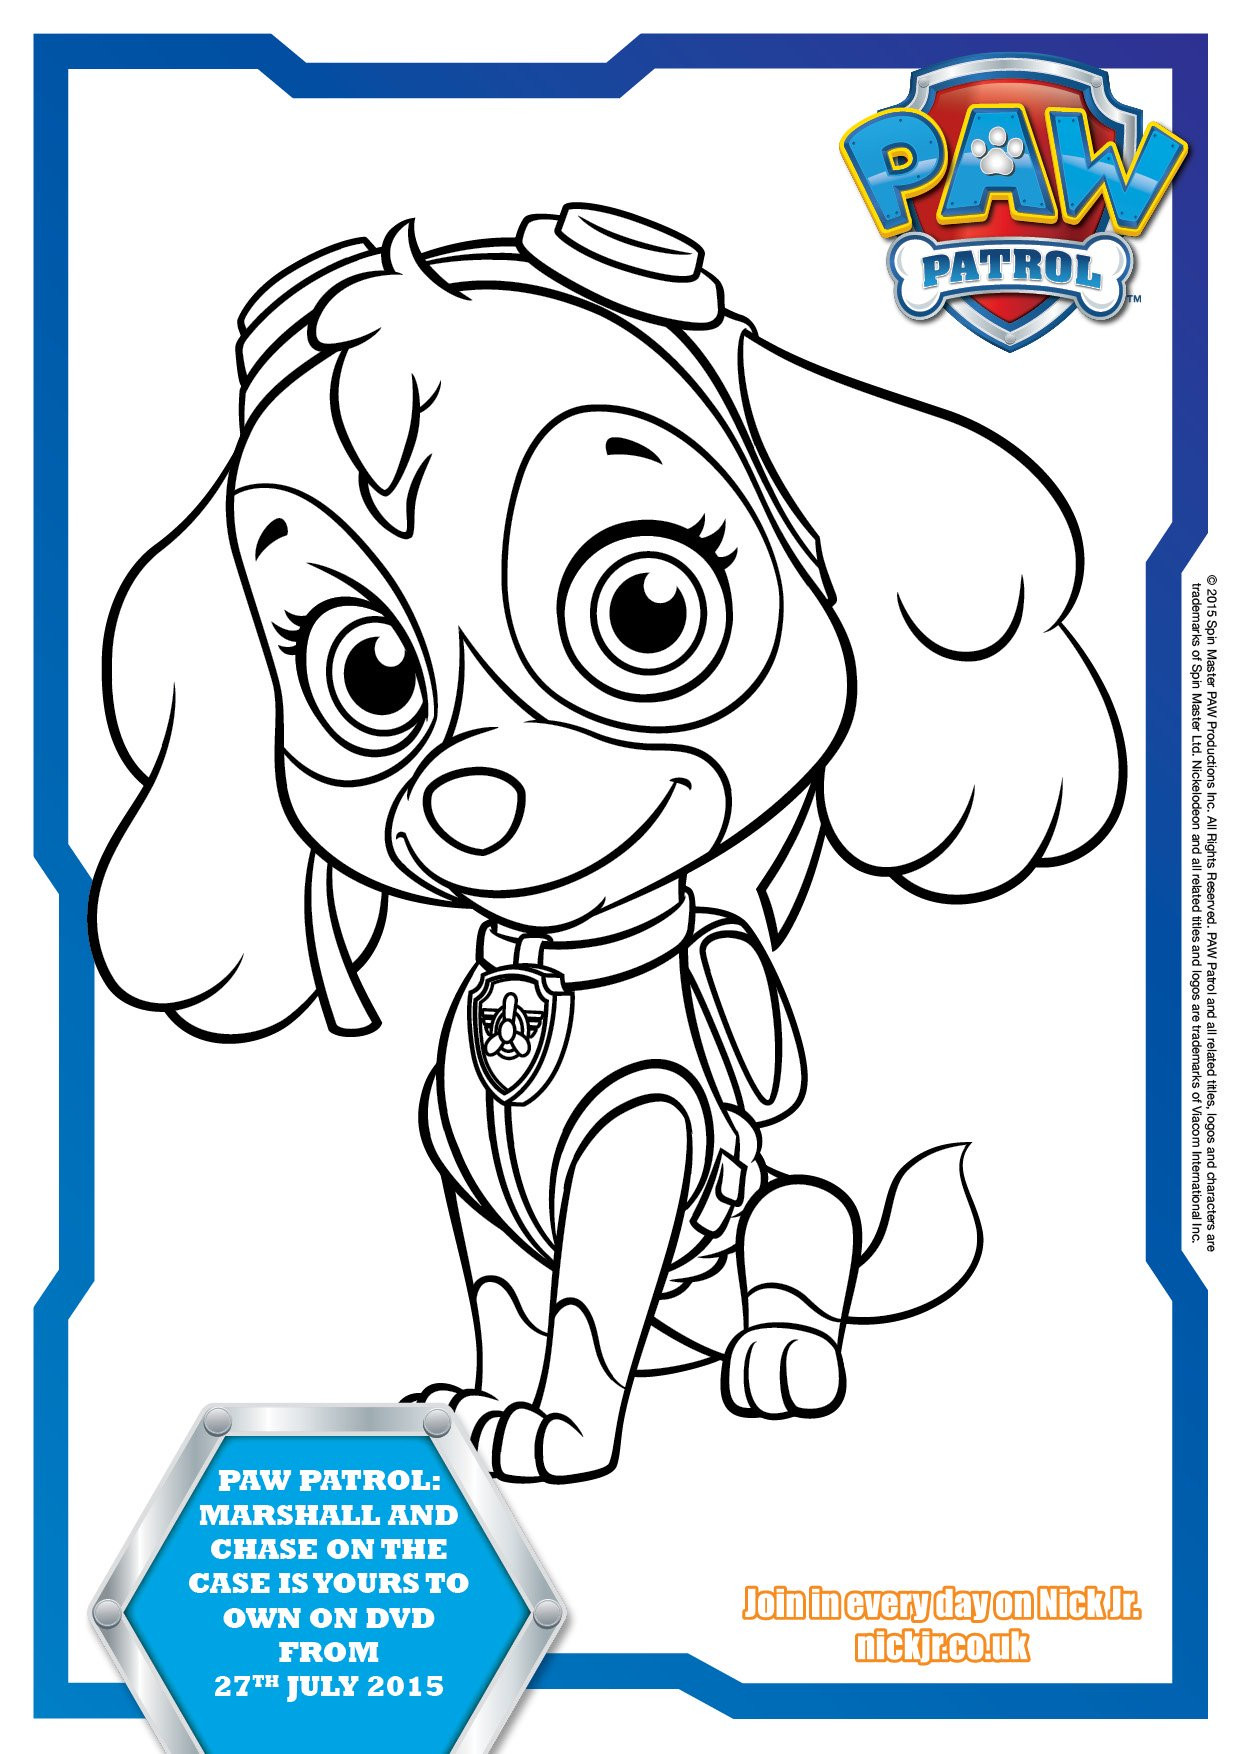 Paw Patrol Coloring Pages For Toddlers
 Paw Patrol Colouring Pages and Activity Sheets In The